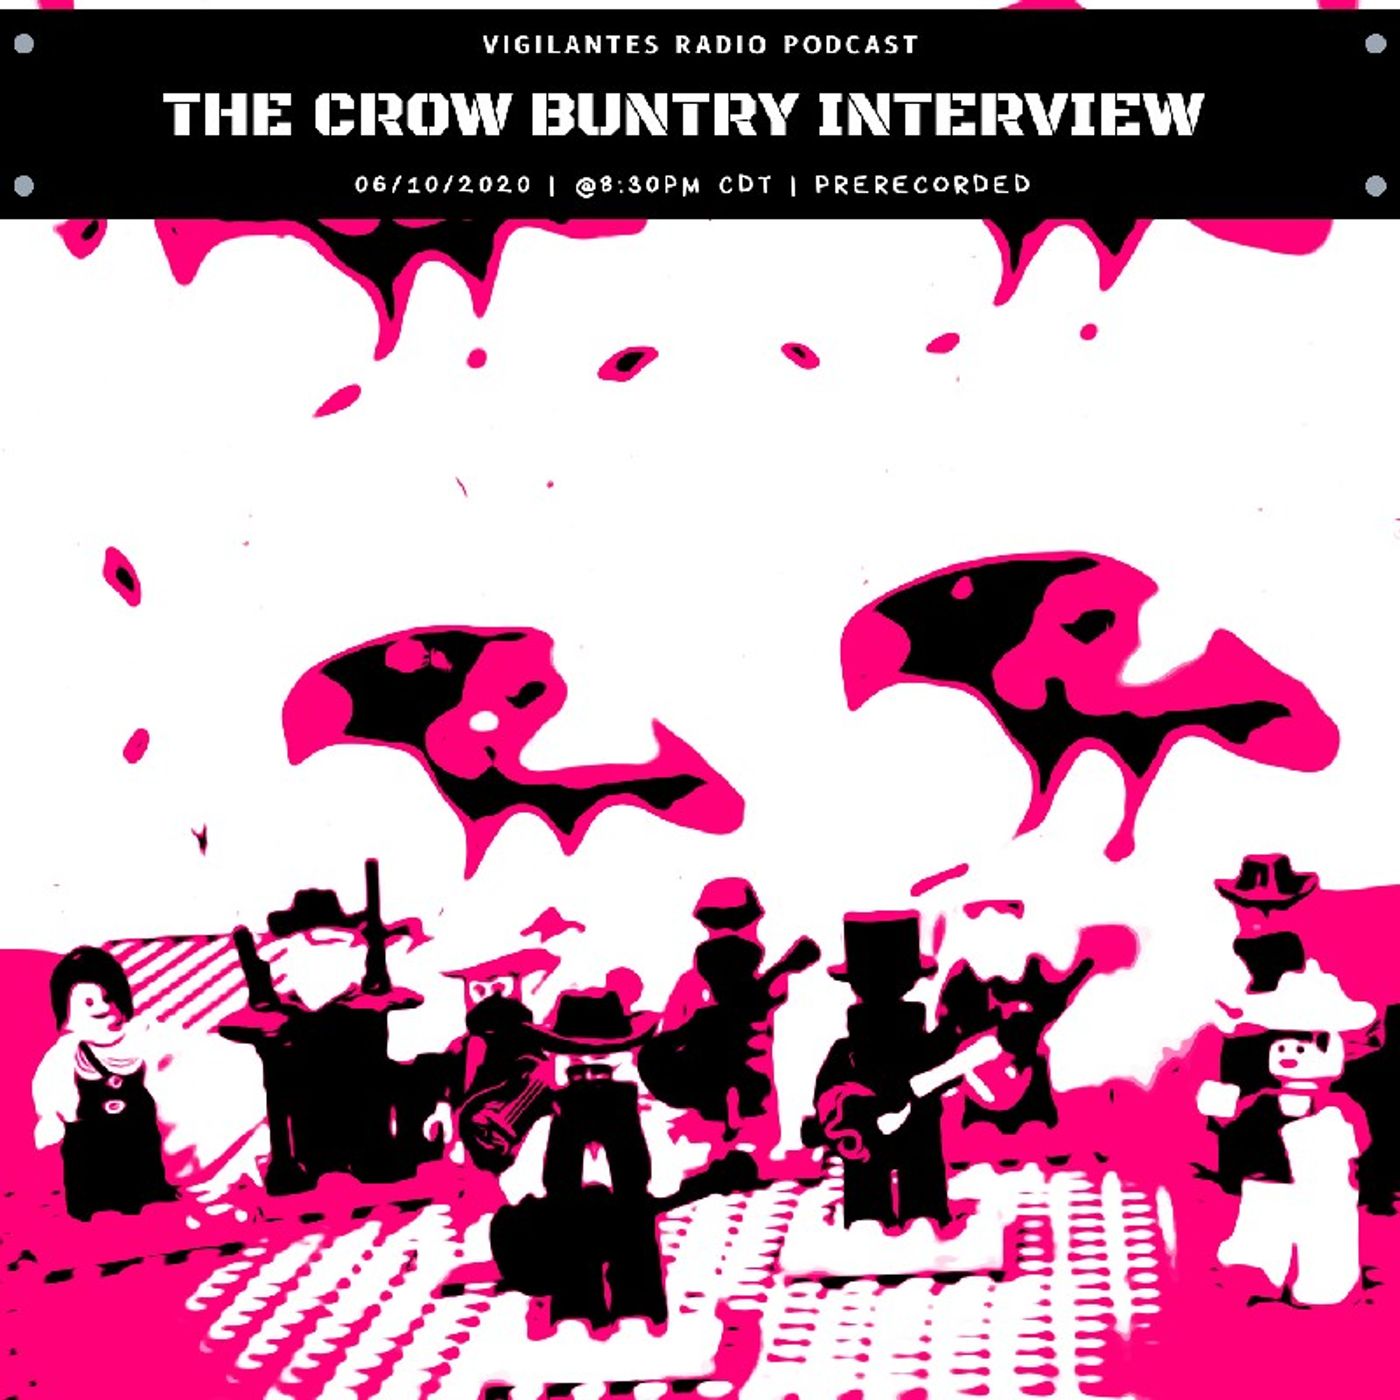 The Crow Buntry Interview. Image